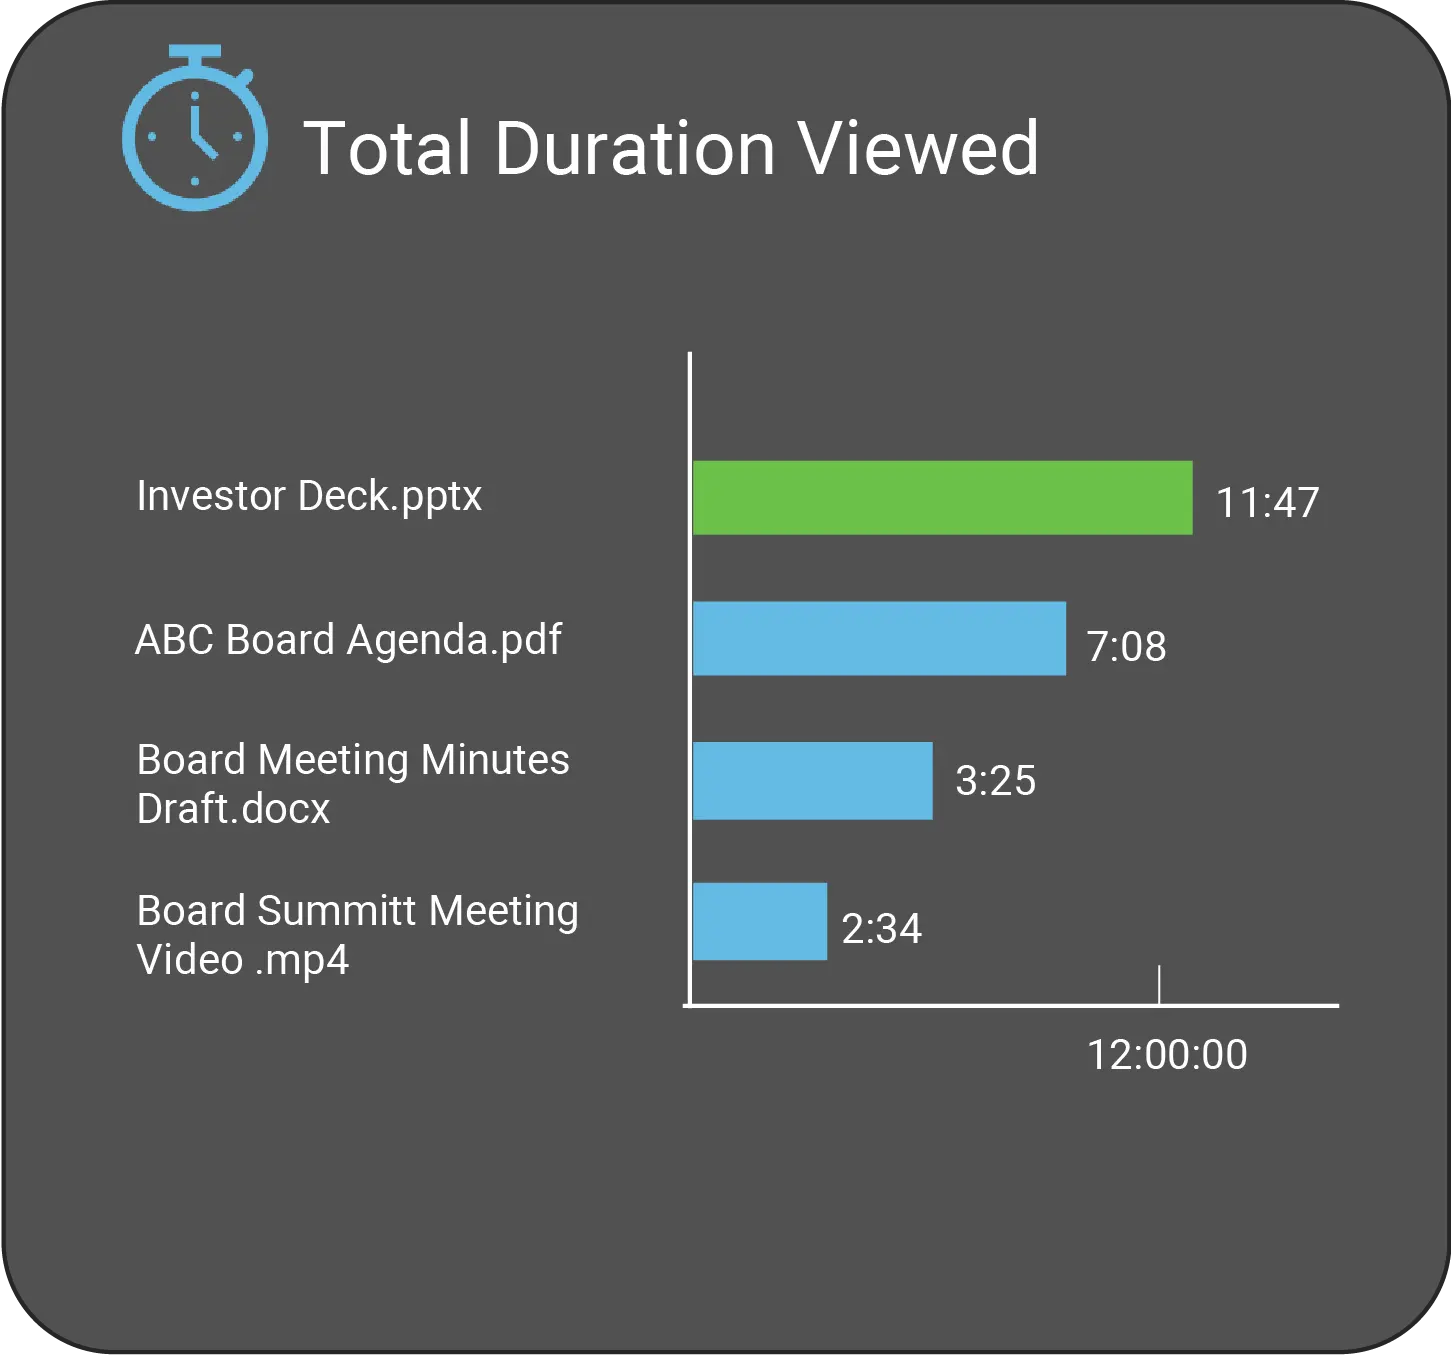 Graph depicts the total duration each content file is viewed